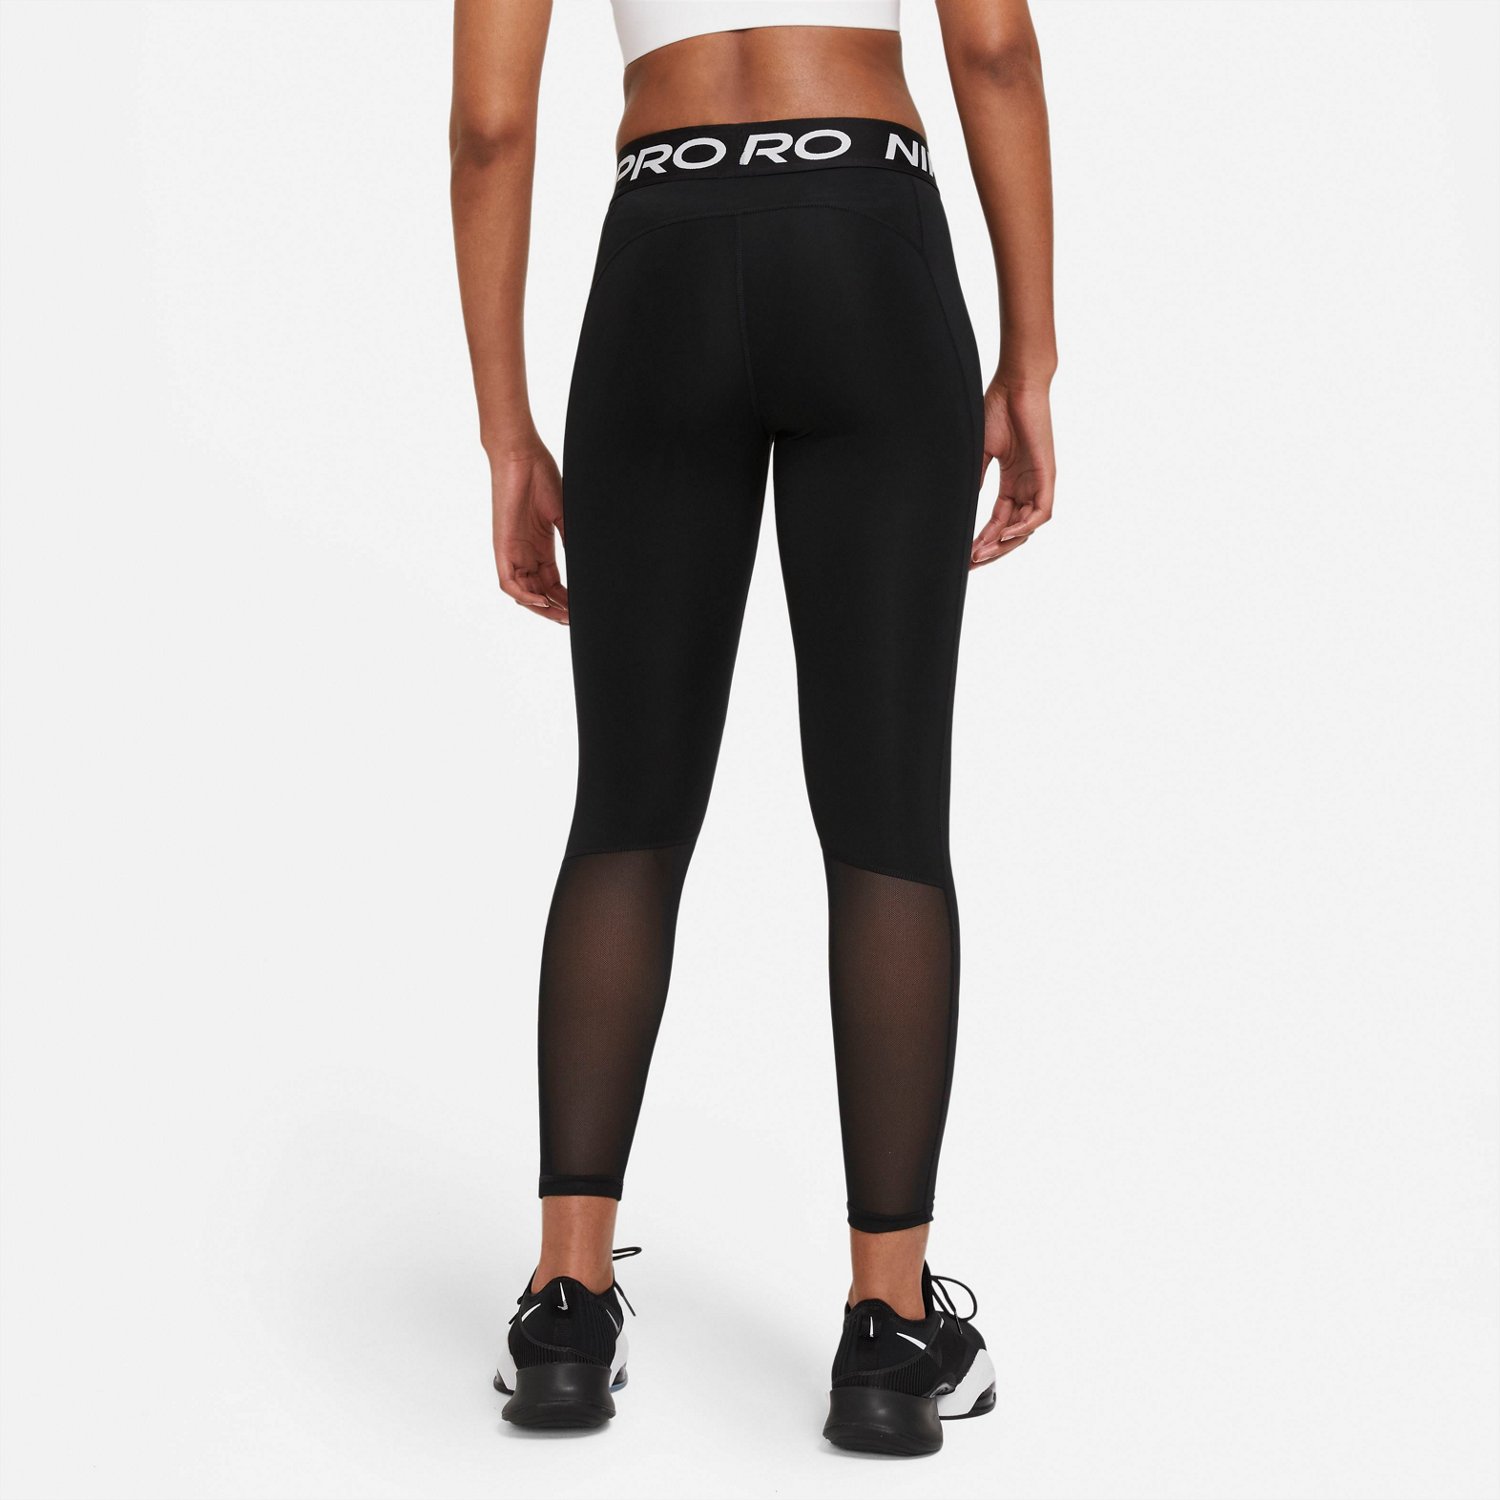 Check out Nike Pro Tights - 889561-071 - by Nike in